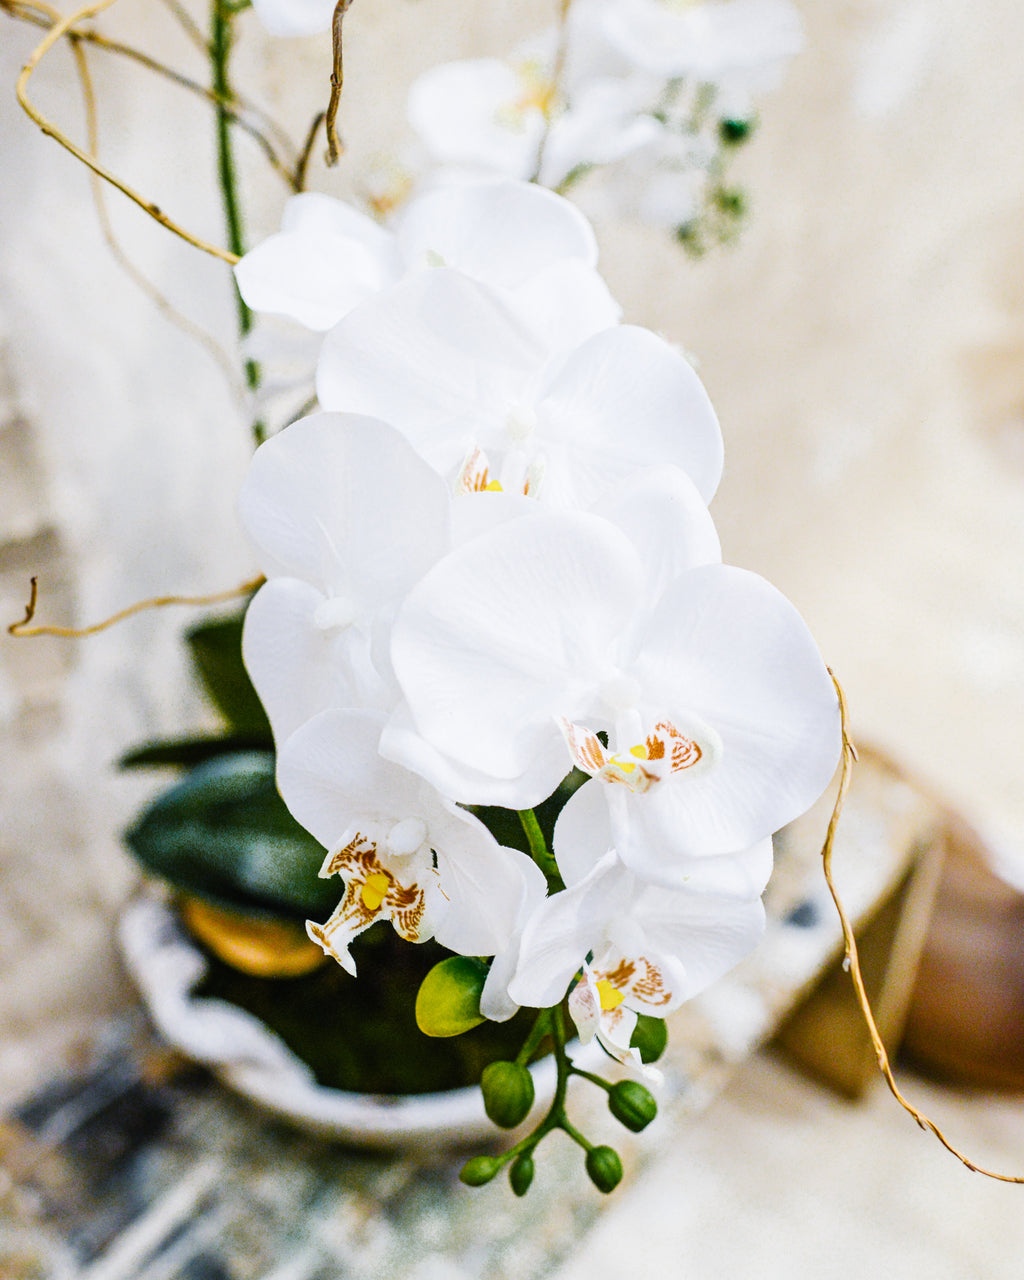 Triple White Phalaenopsis Orchid Drop-In Centerpiece